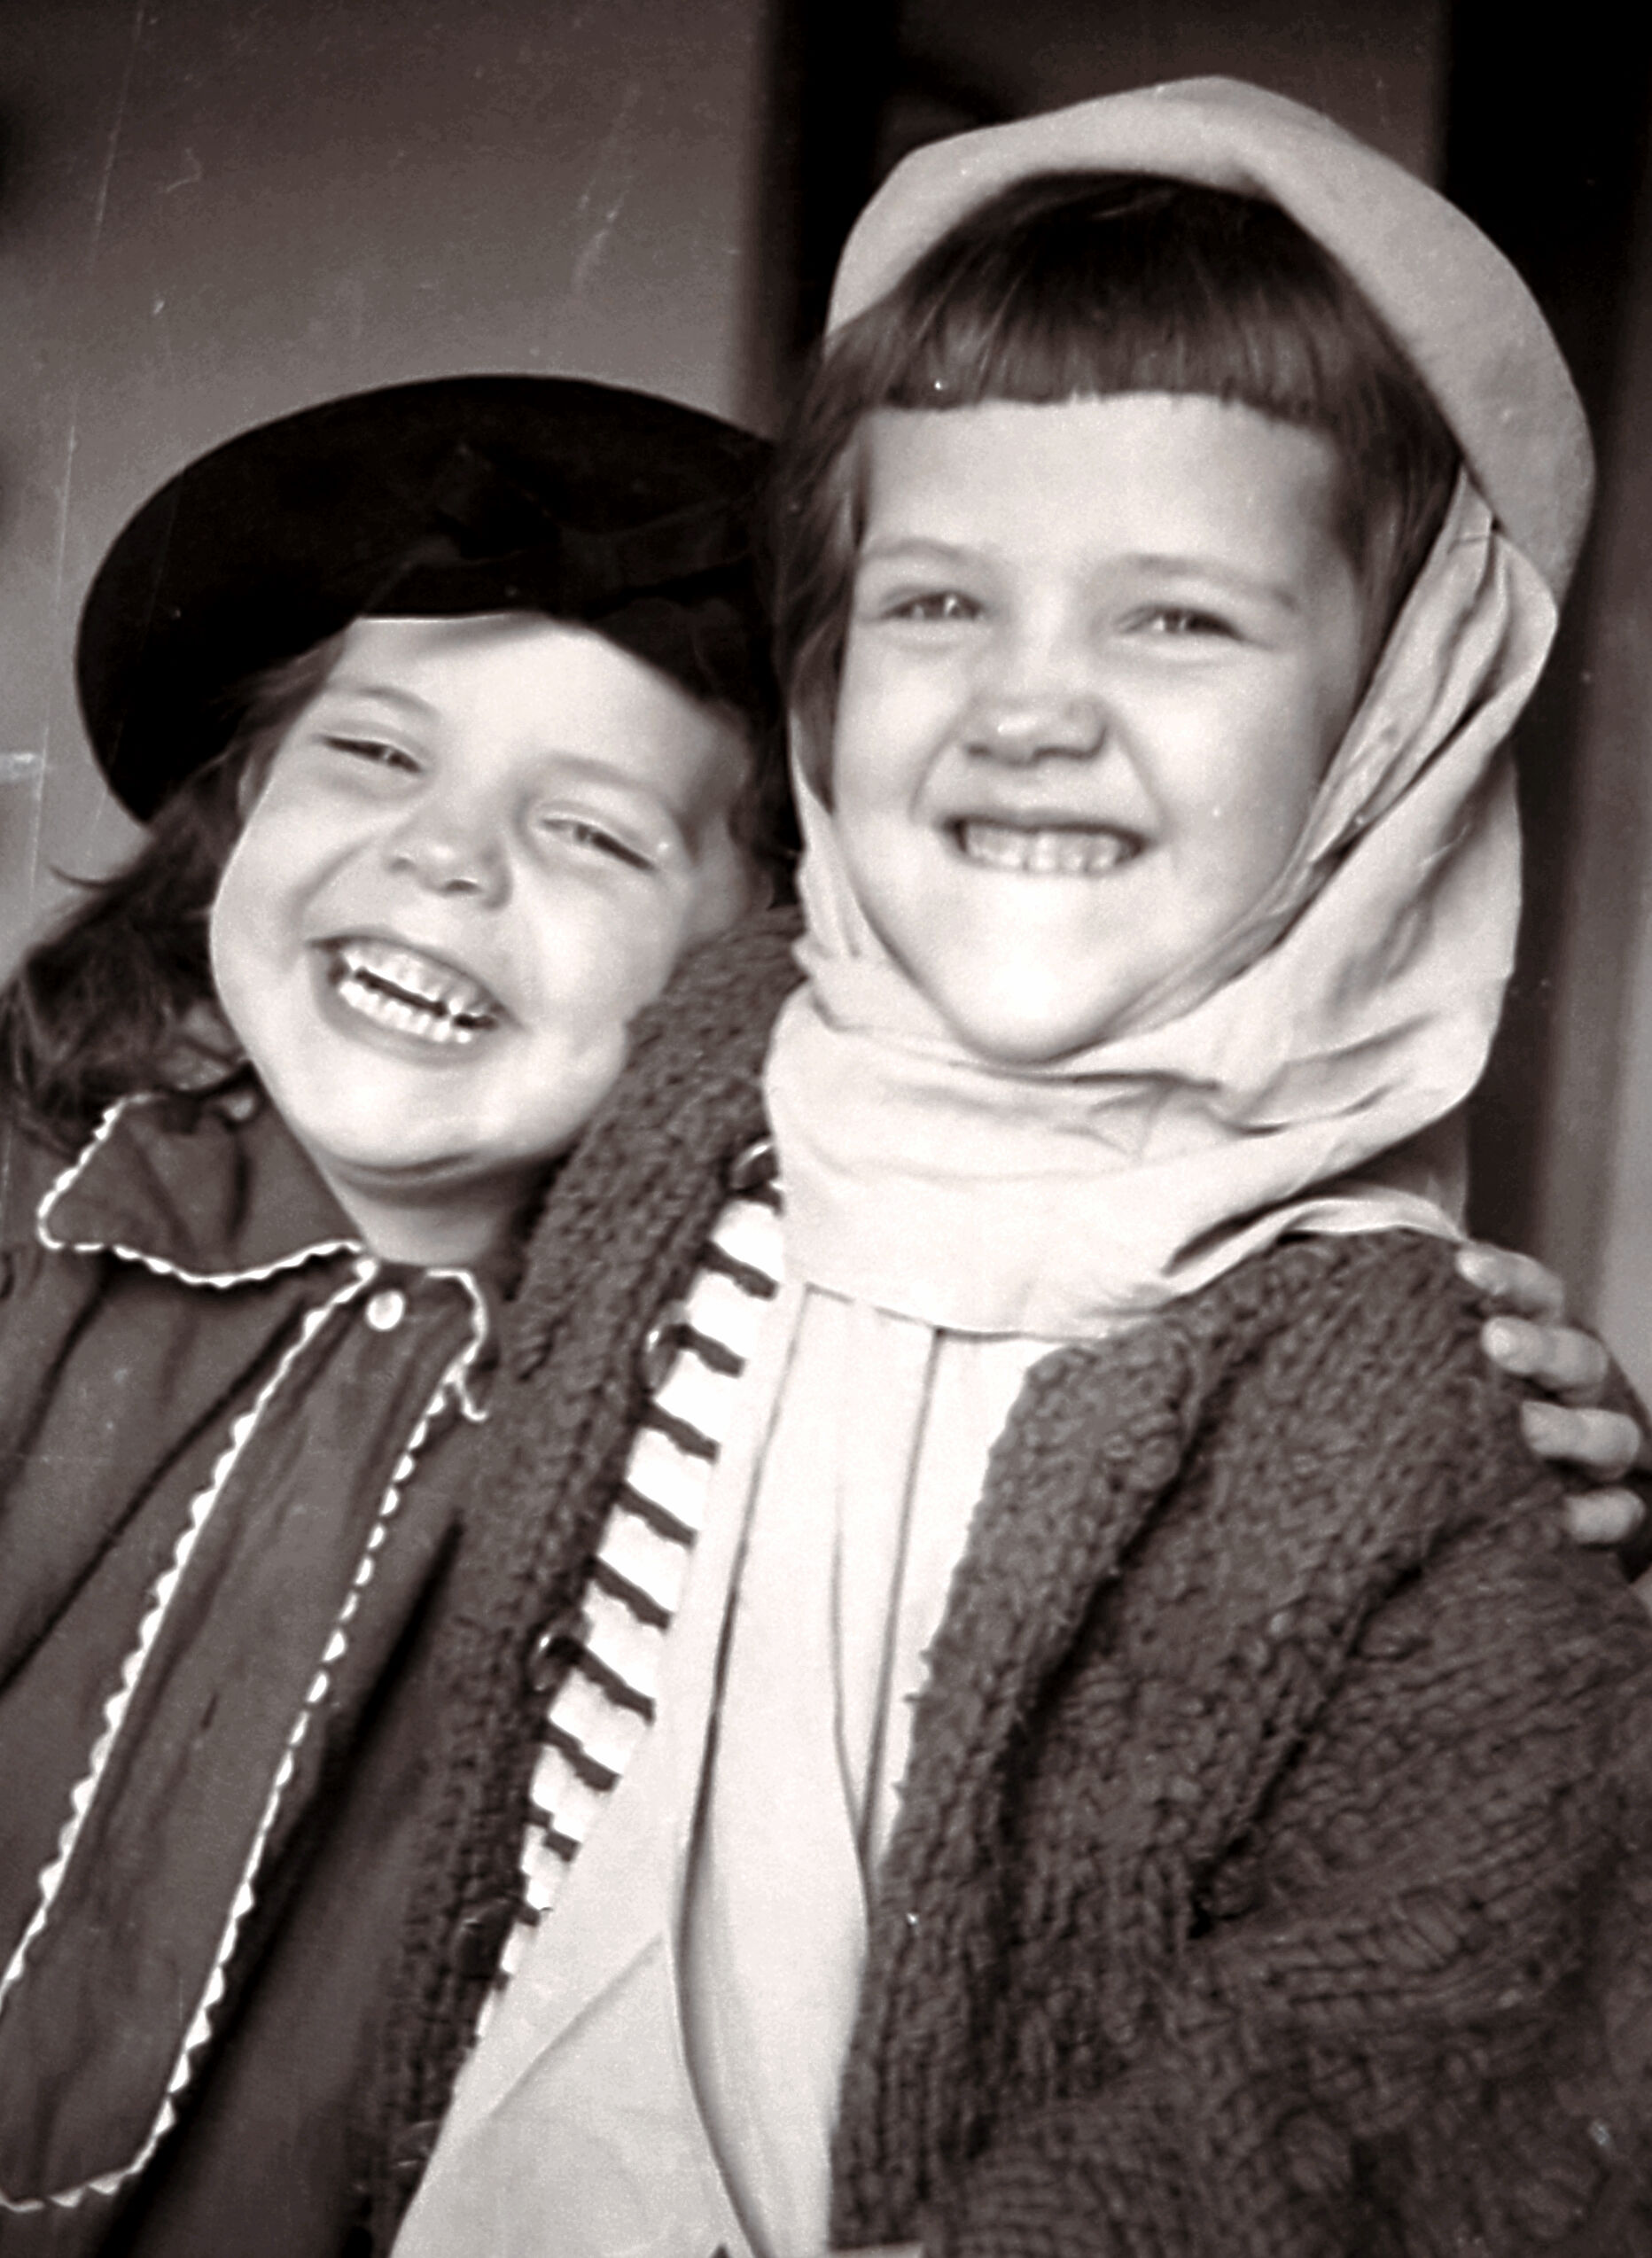 photo of me and my sister taken by my mom Phyllis Kinney in 1955!